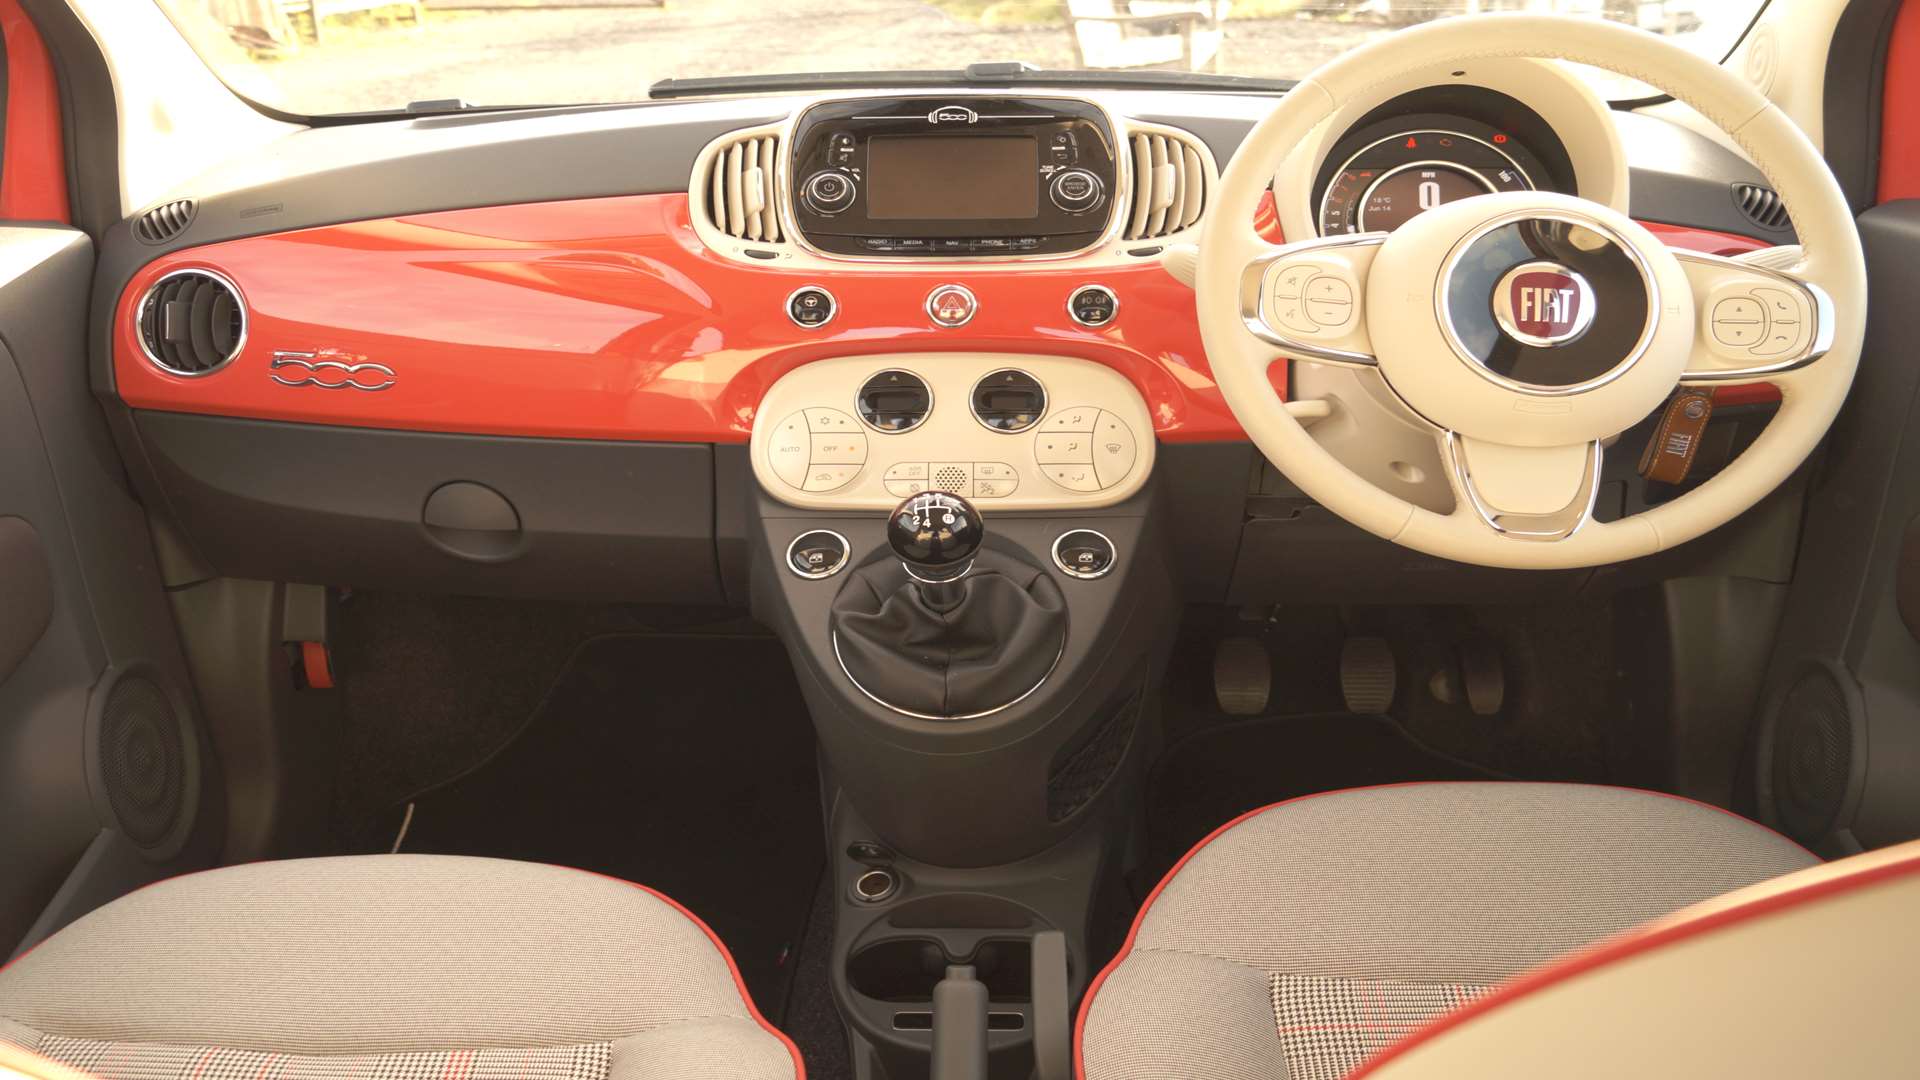 The dash is colour-coded